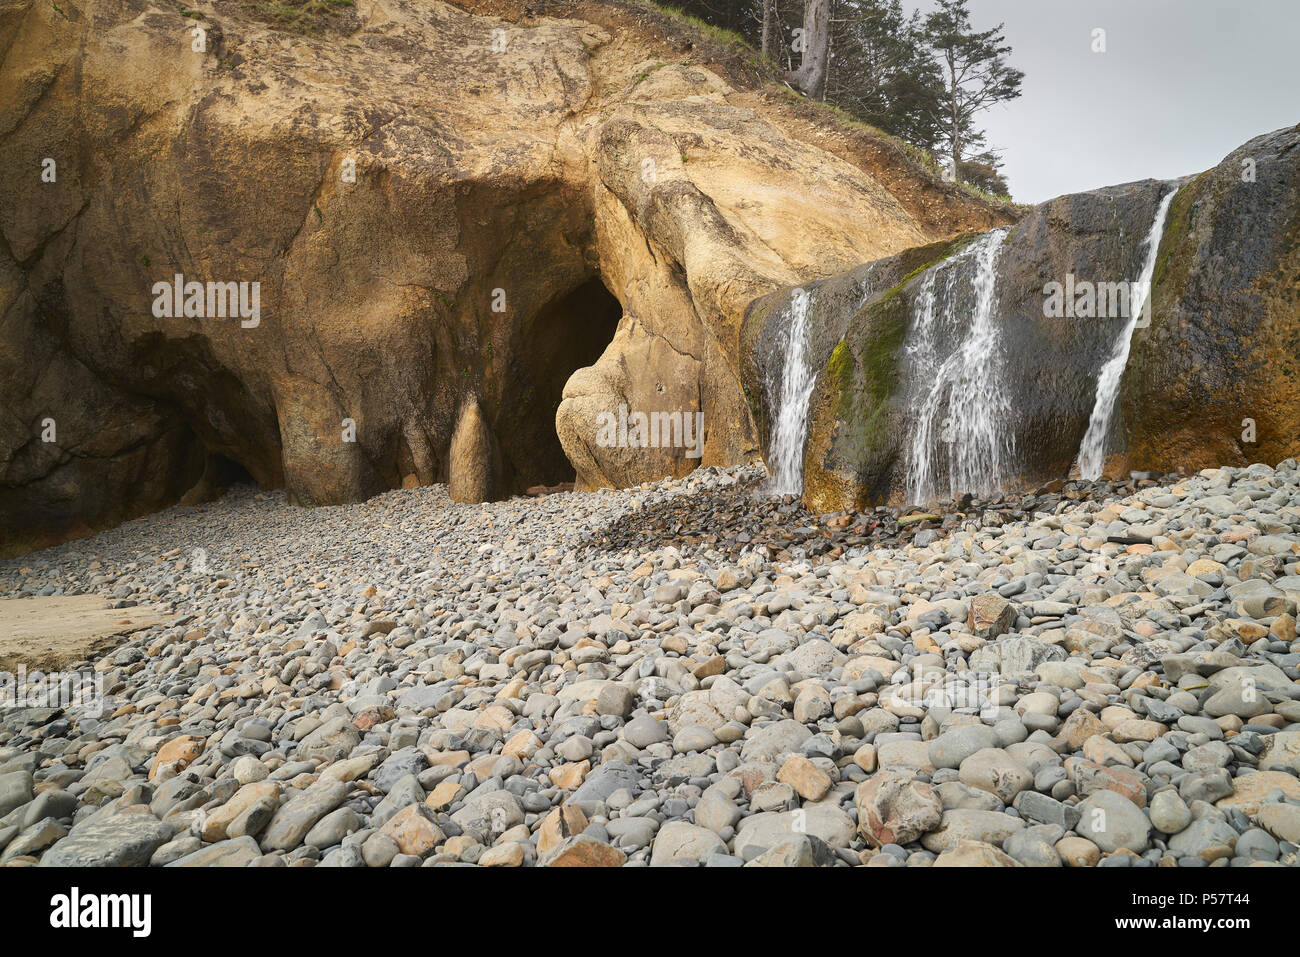 Hug Point, Oregon, United States The caves and waterfall in Hug Point State Recreation Site. Stock Photo